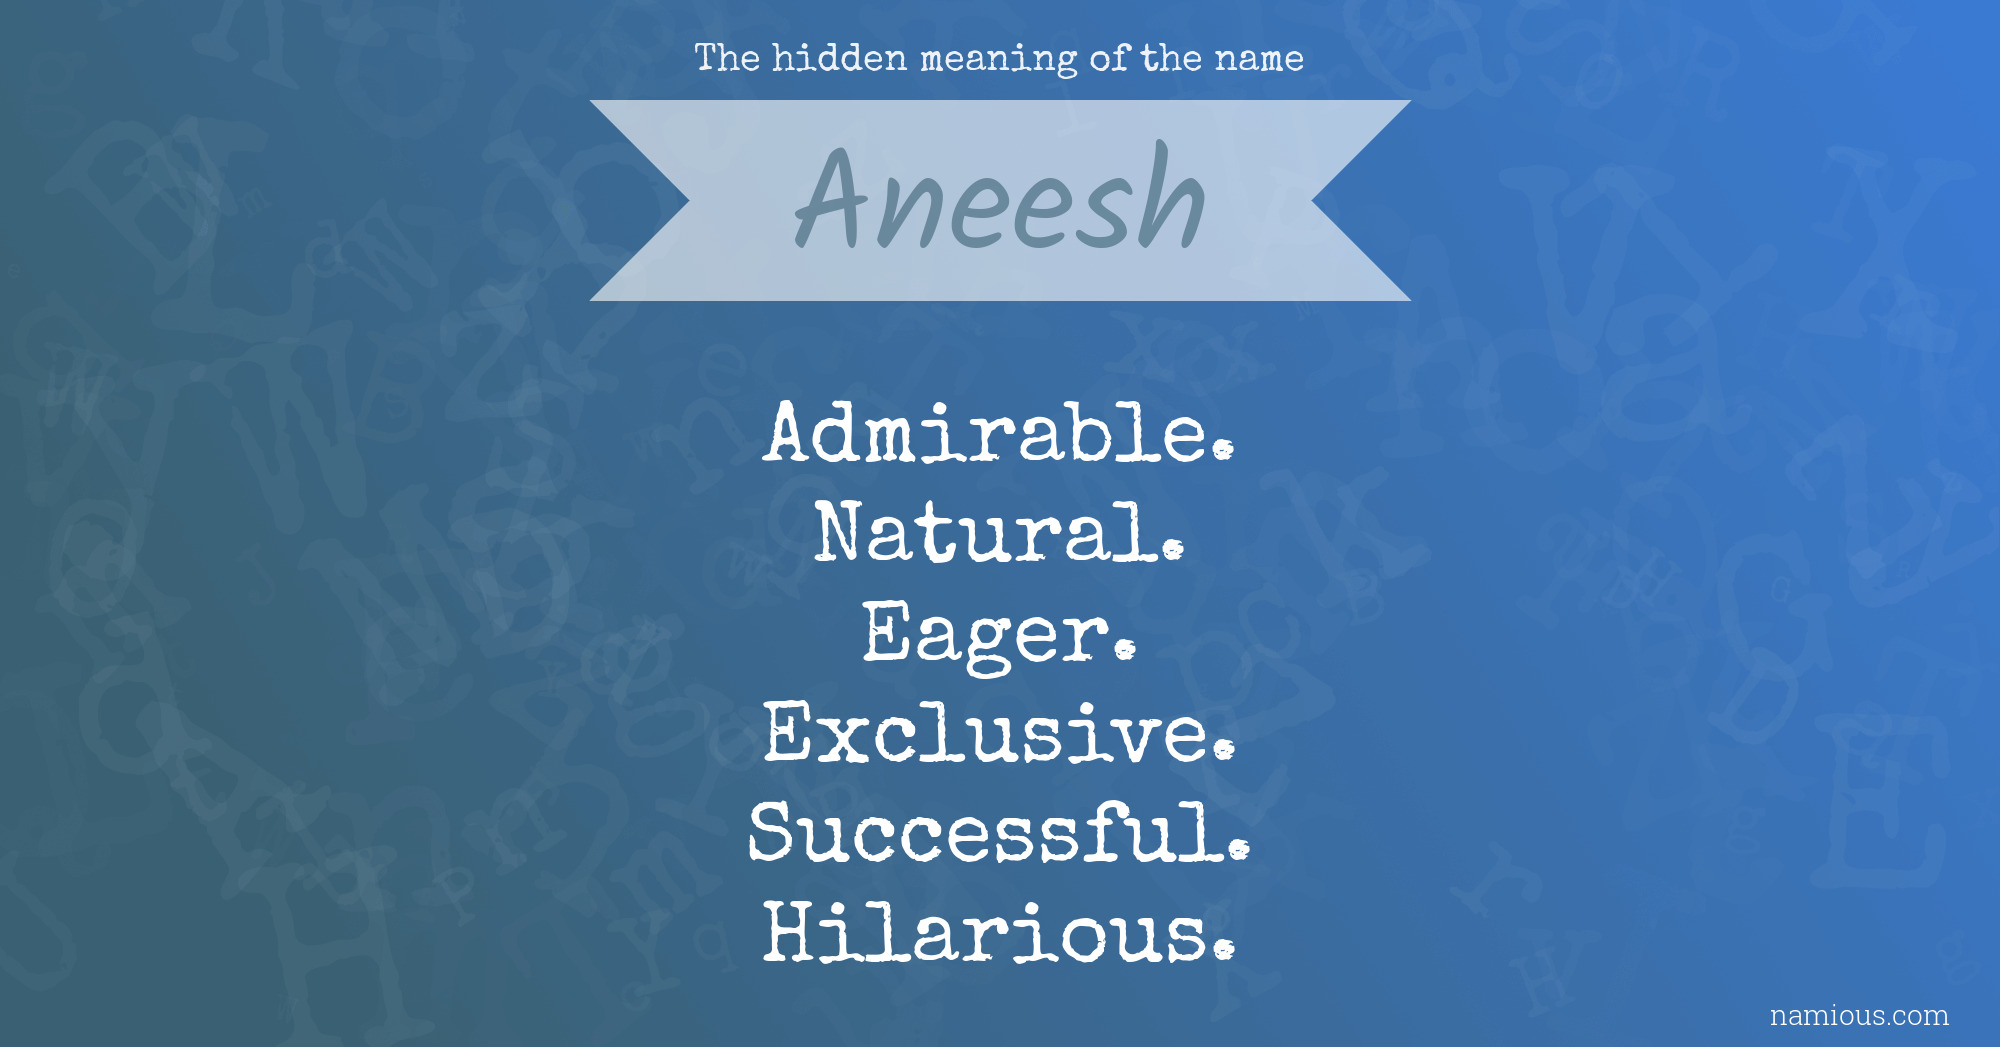 The hidden meaning of the name Aneesh